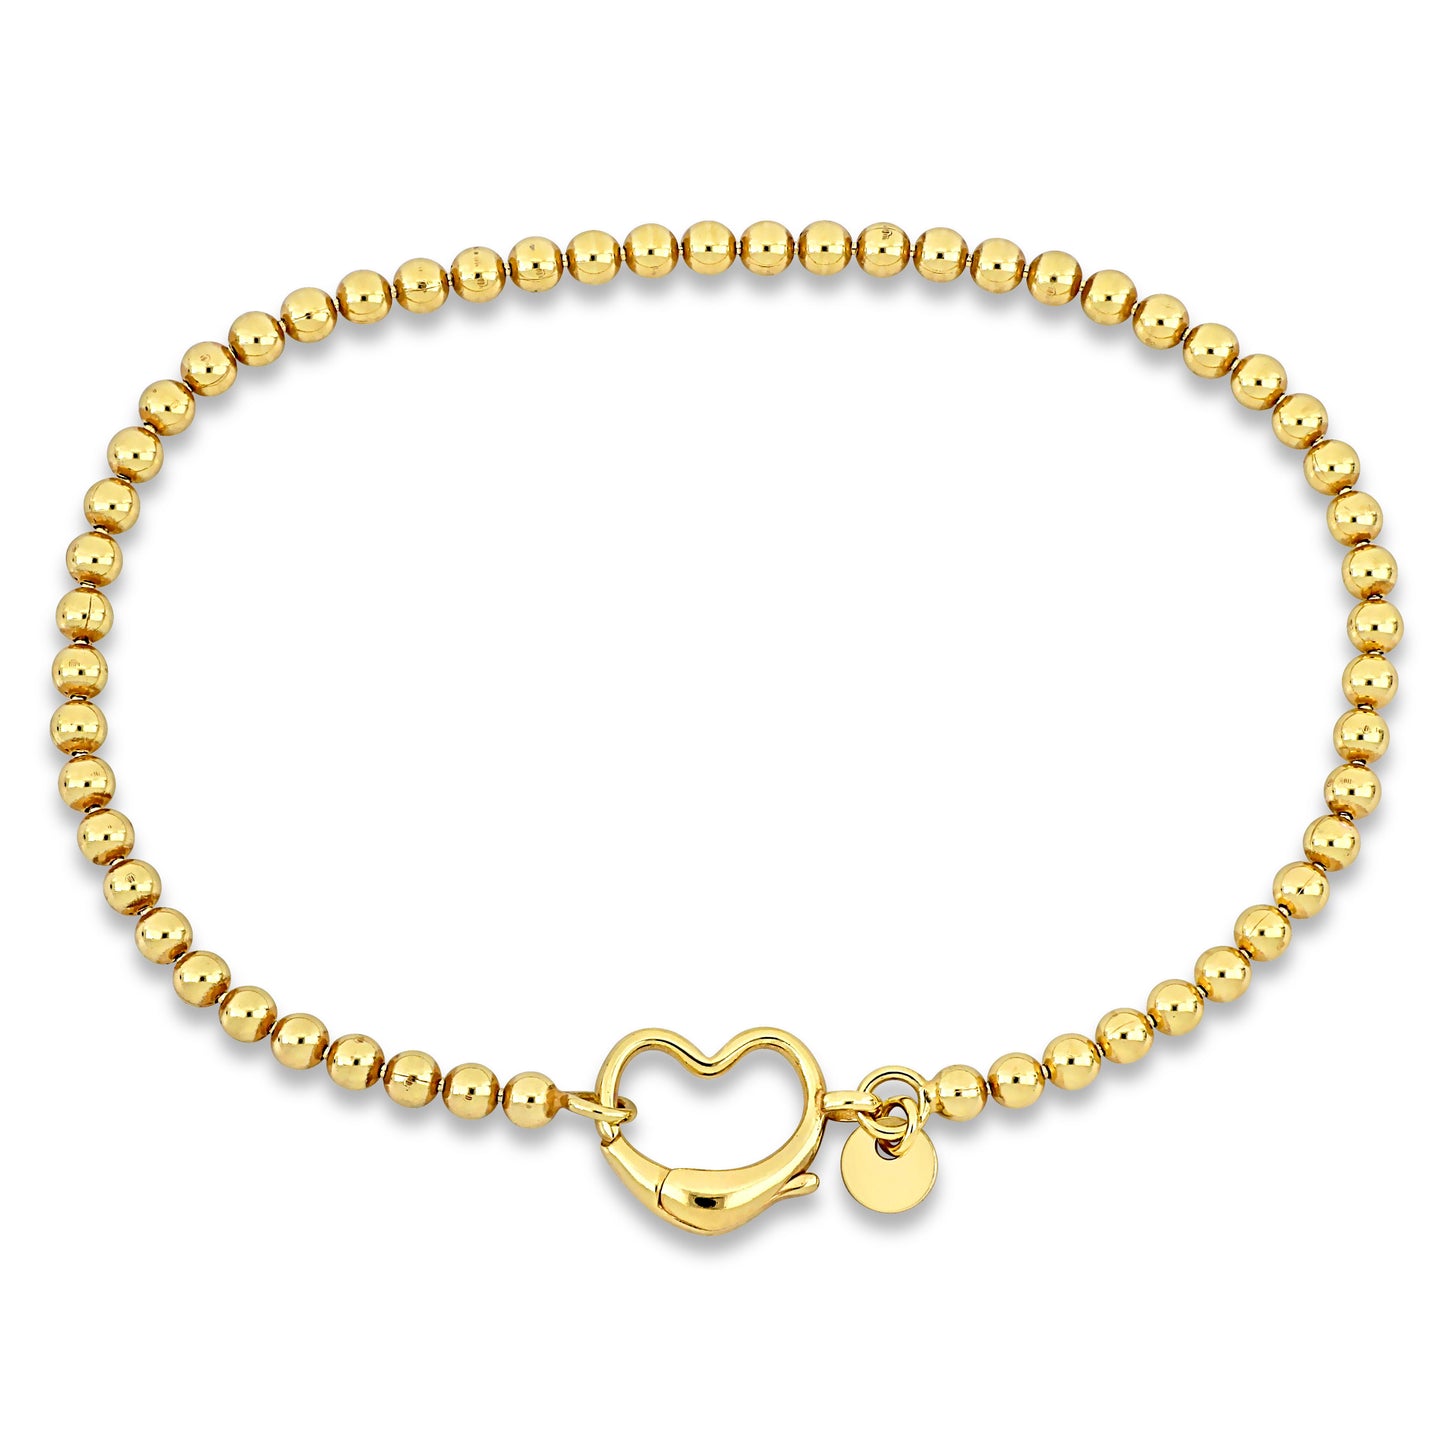 Silver Yellow Ball Link Anklet w/heart clasp 9